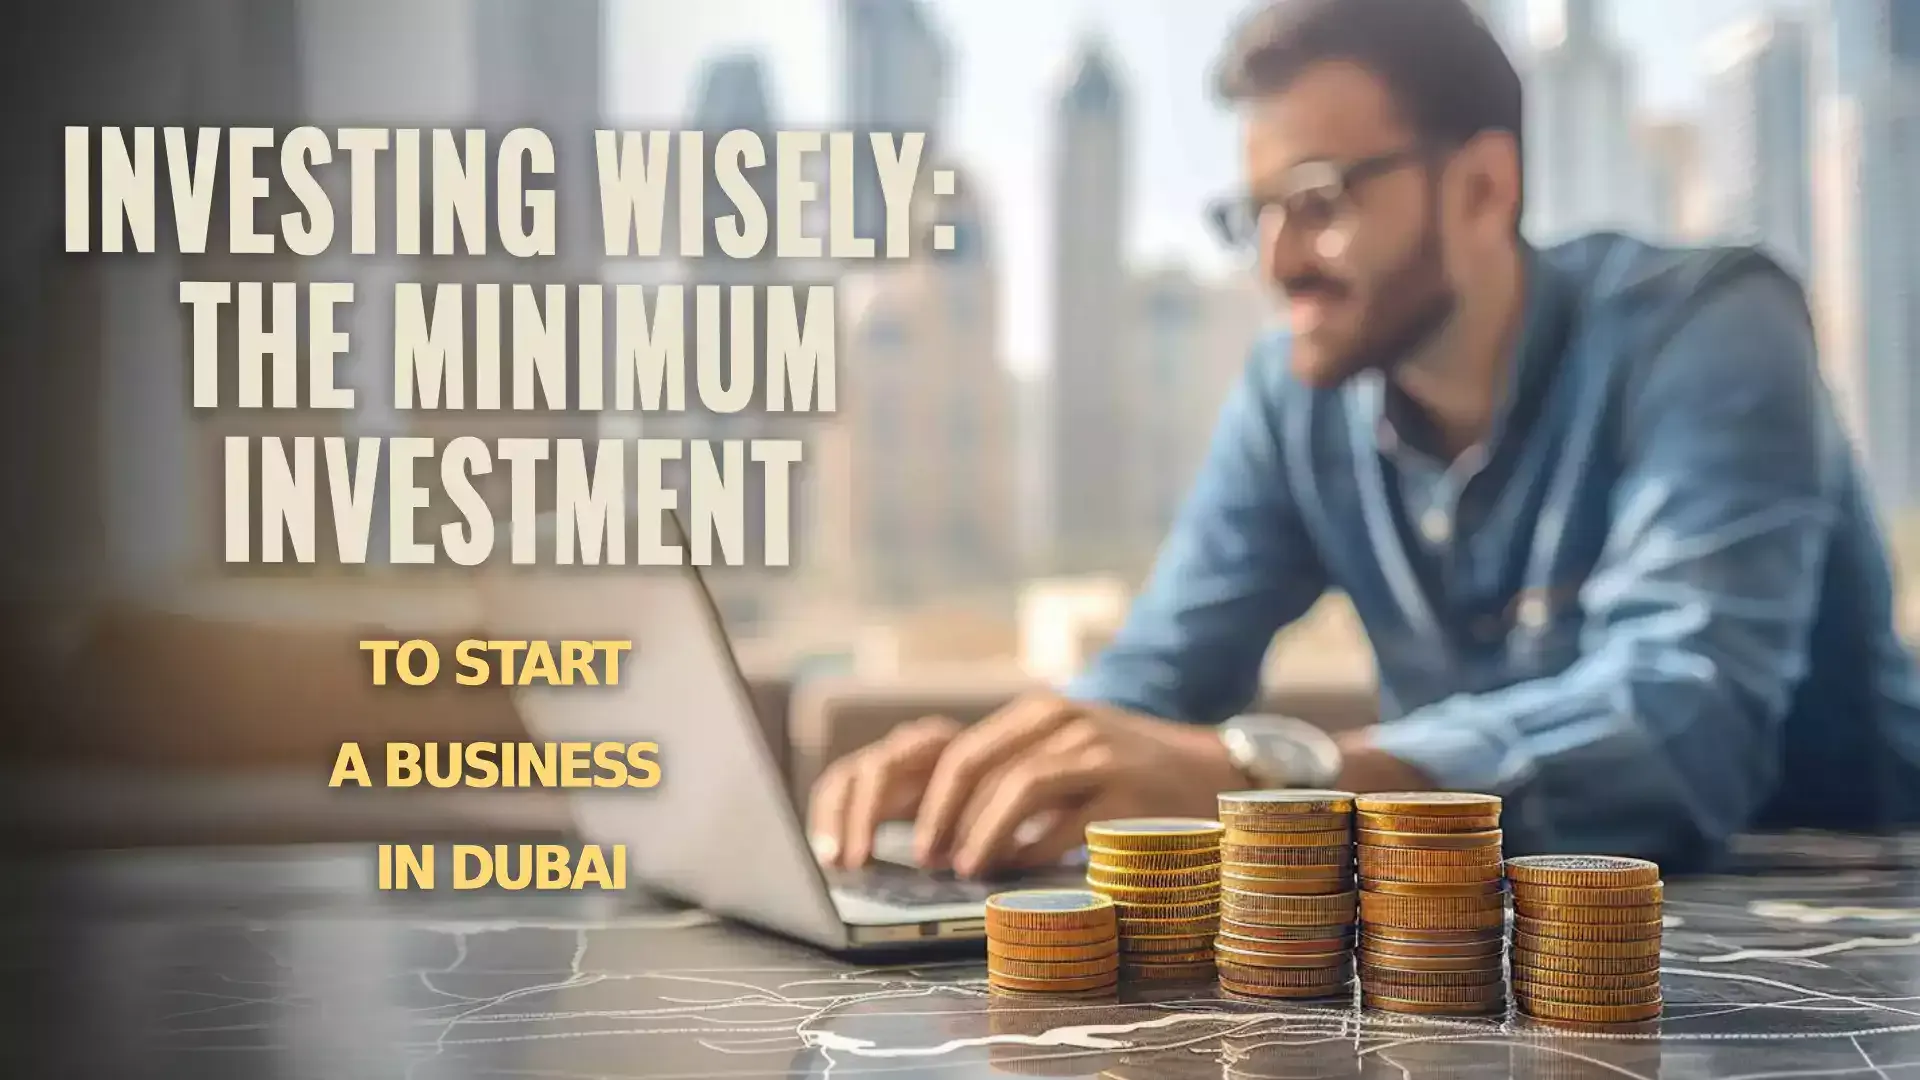 Dubai Business Opportunities Low Investment